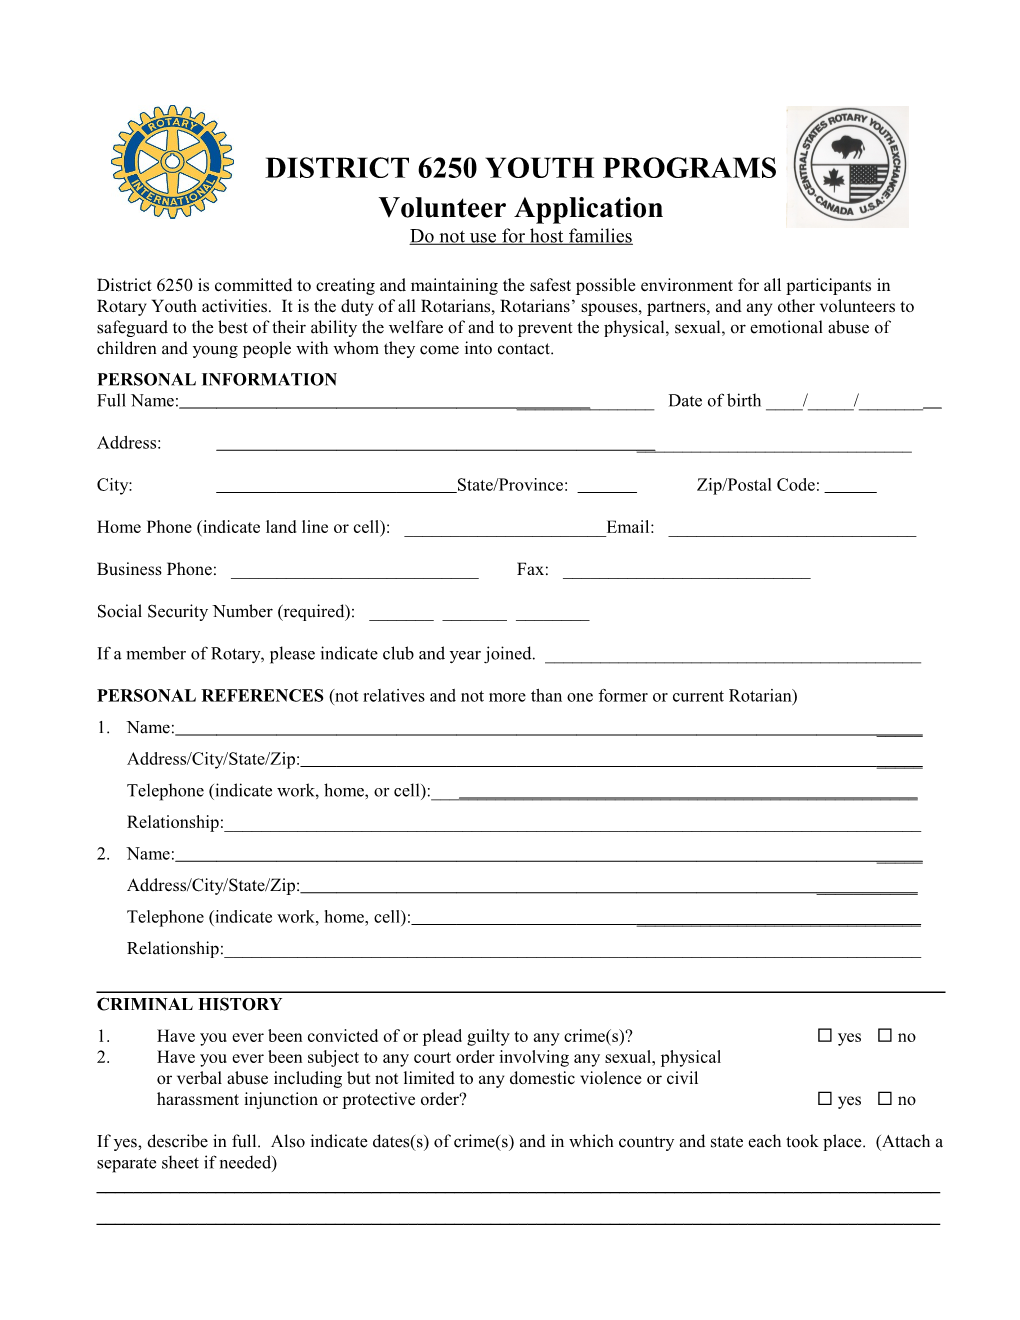 District 6250 Youth Protection Policy